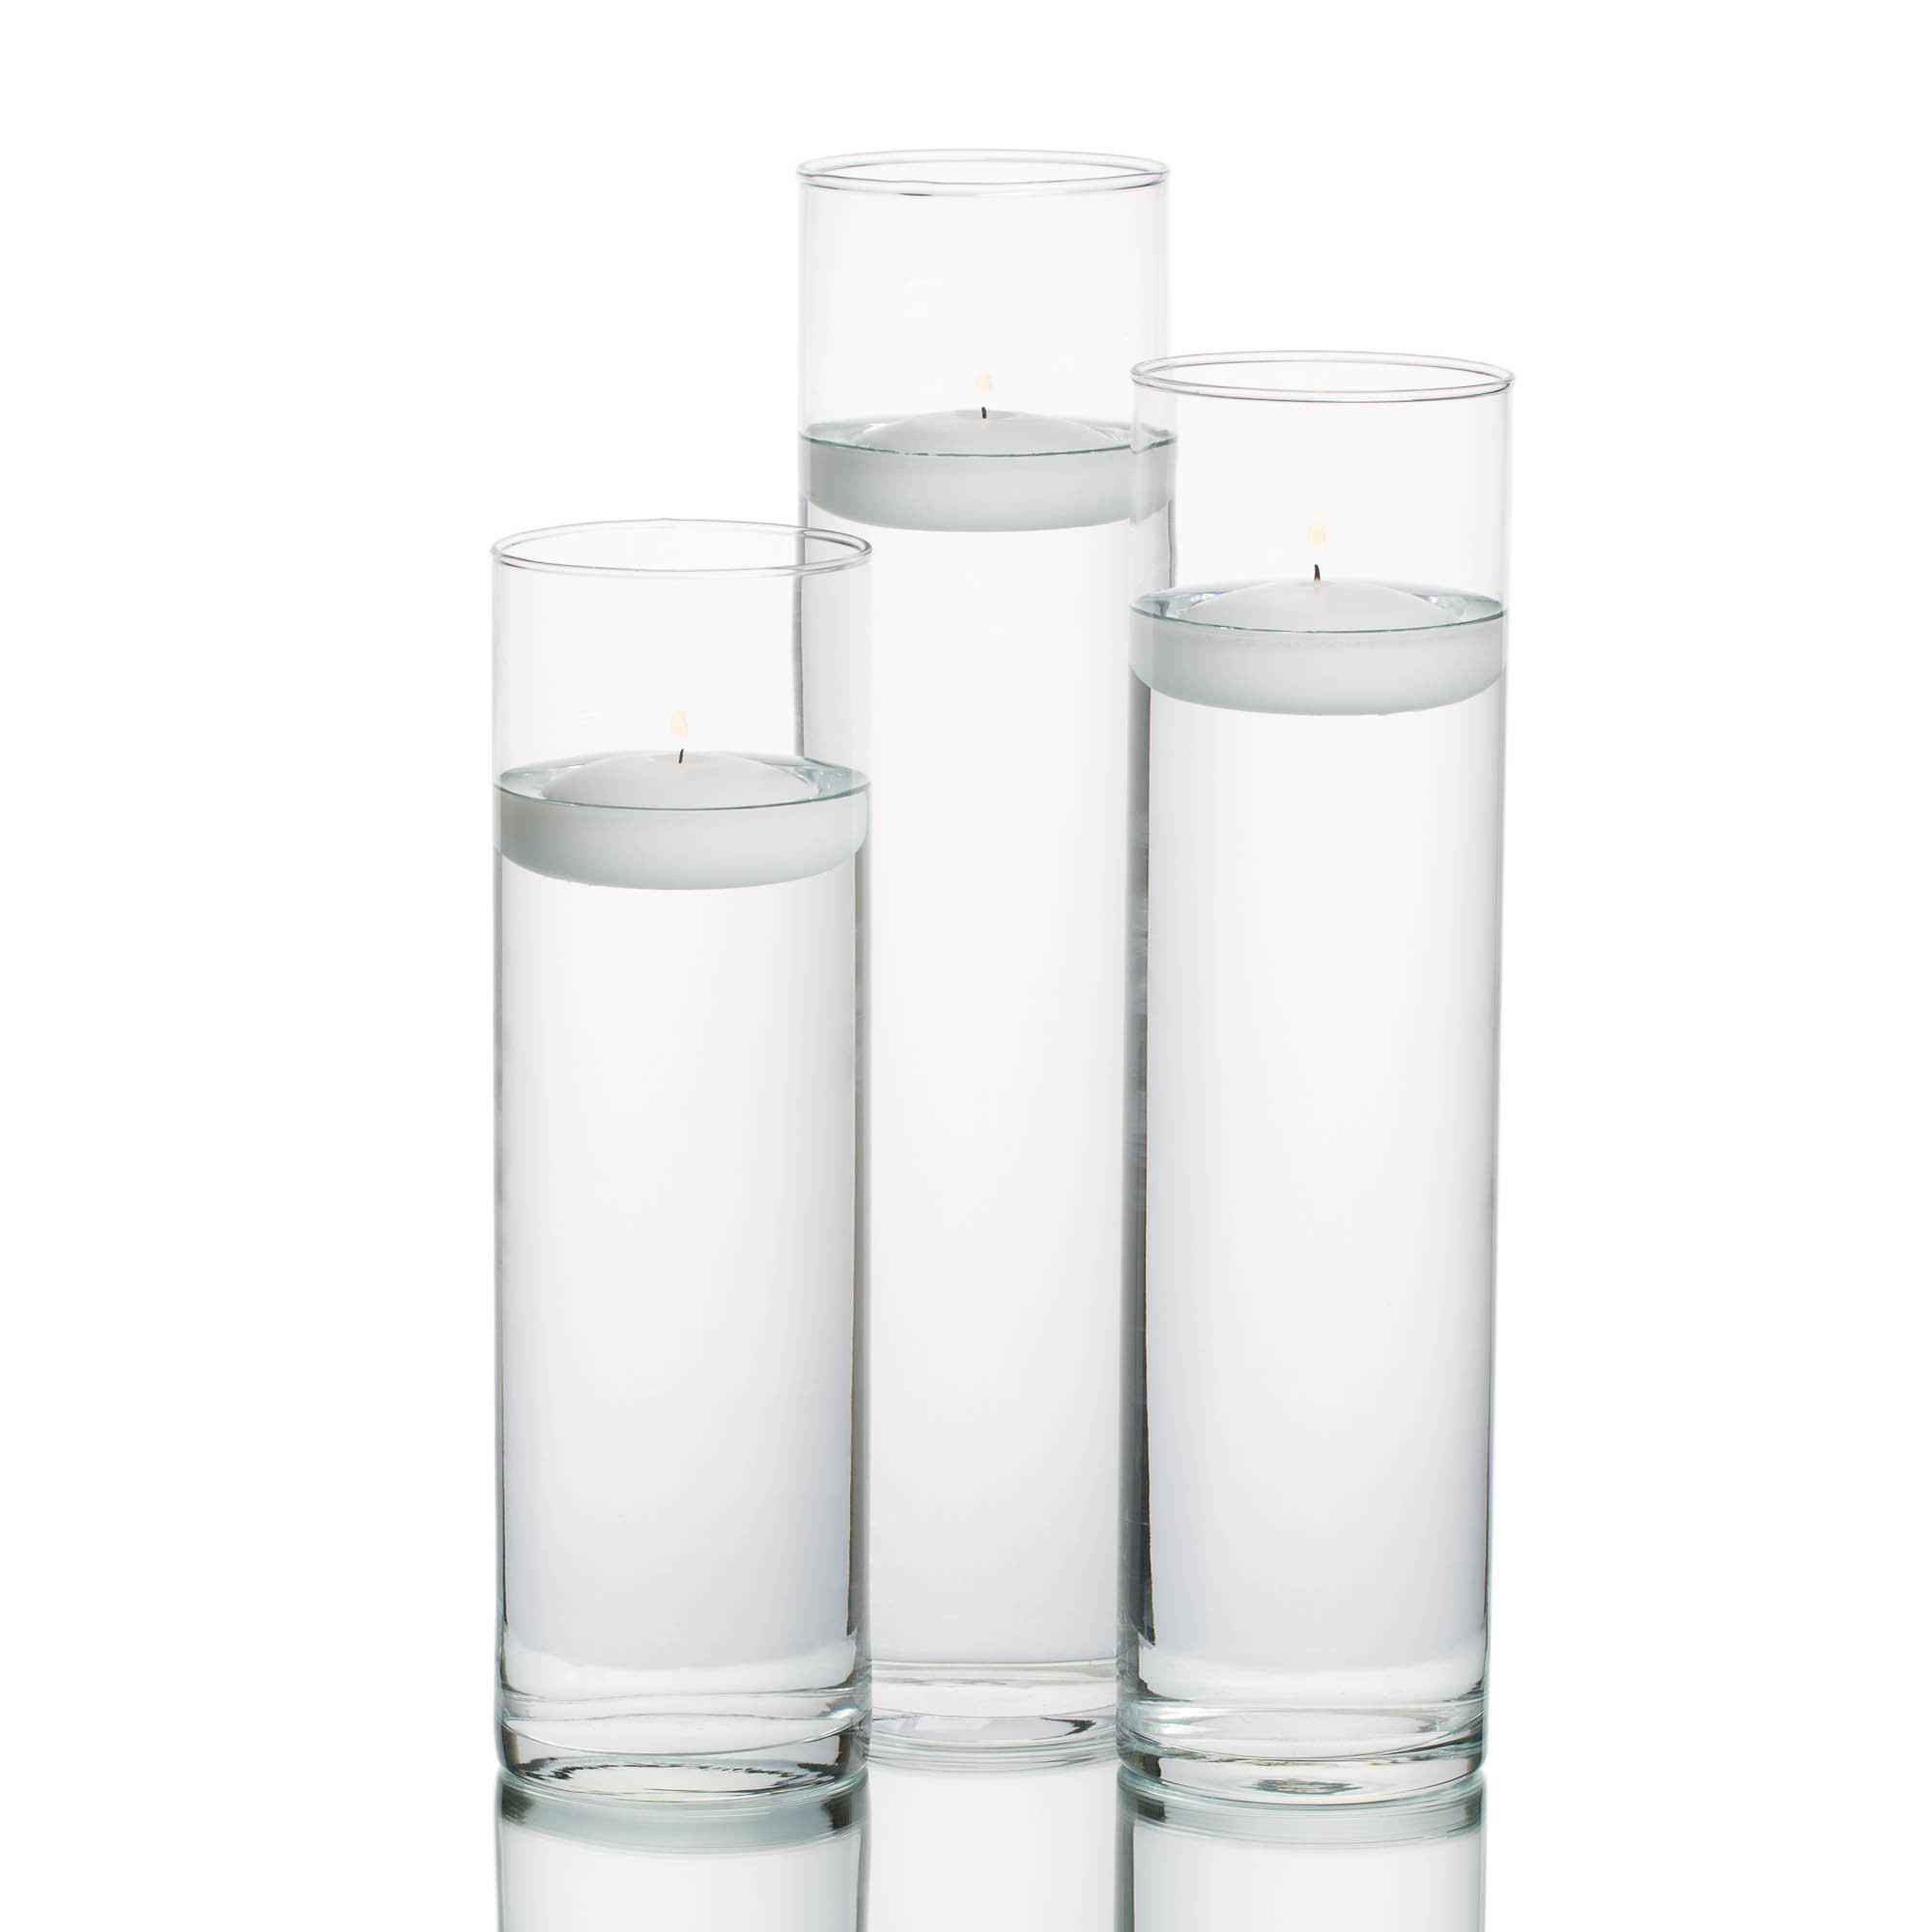 18 Perfect Glass Pillar Vase 2024 free download glass pillar vase of glass pillar candle holders amazon for 3 set glass candle holders in cylinder vase centerpiece with flowers submerged flowersh vases 3 set glass candle holders